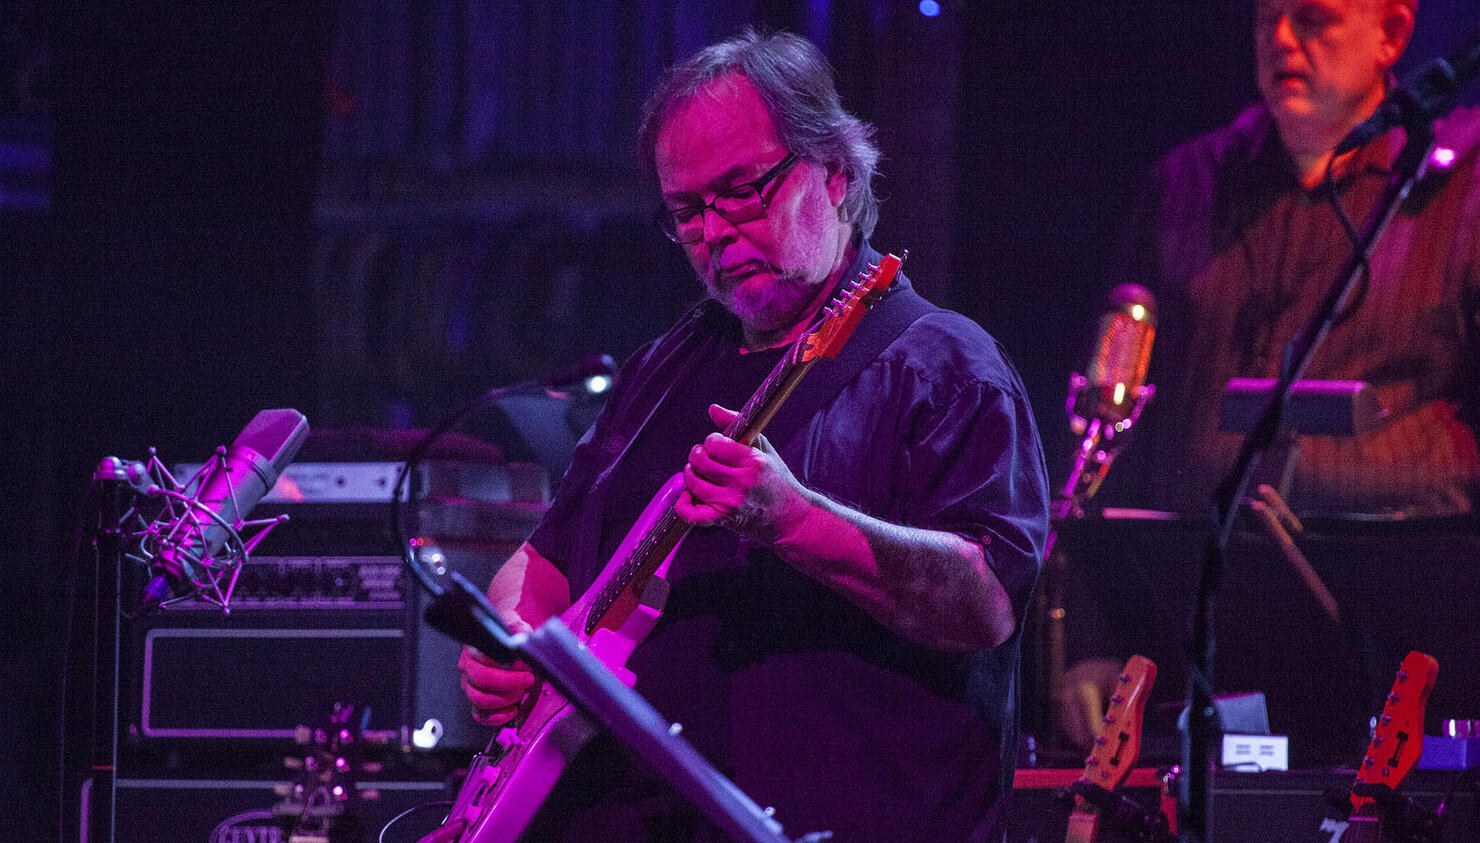 NYC Street to Be Renamed Walter Becker Way in Honor of Steely Dan Co-founder